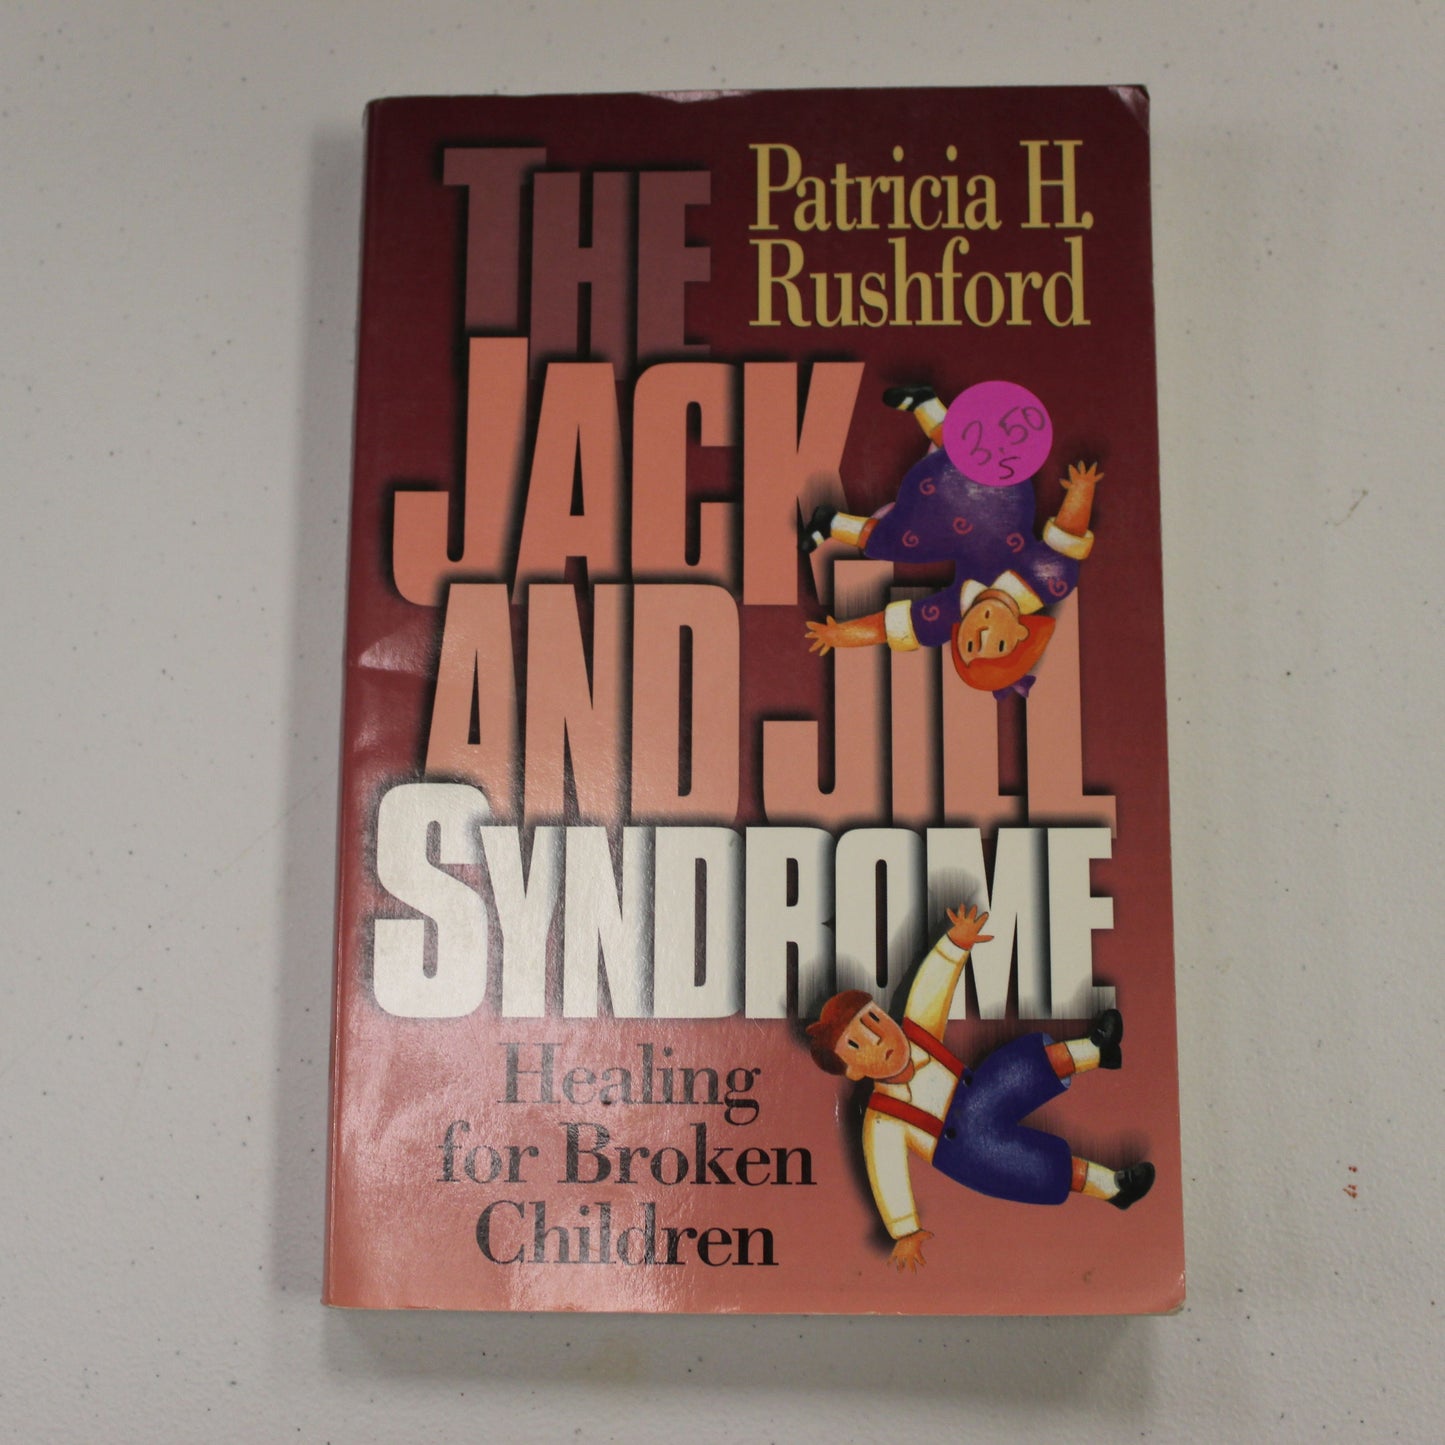 THE JACK AND JILL SYNDROME